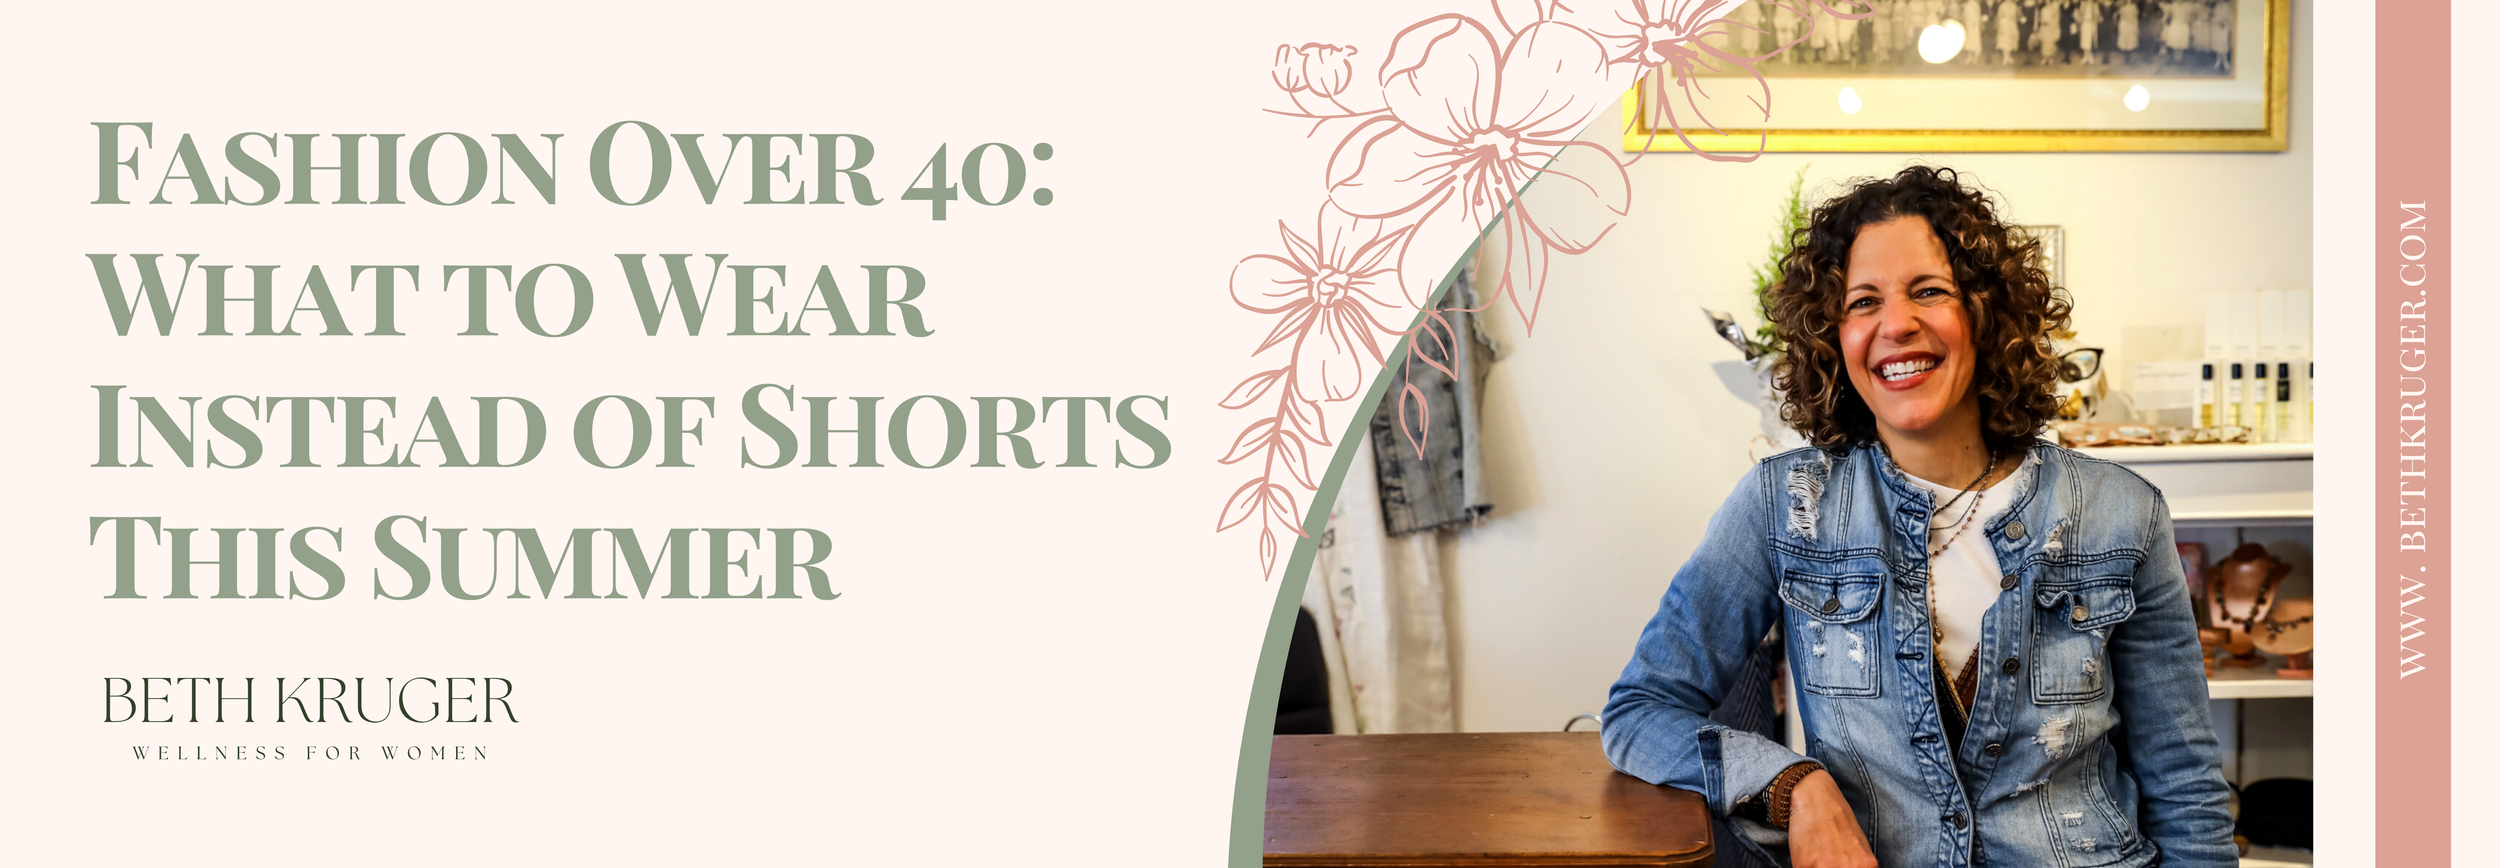 Fashion Over 40: What to Wear Instead of Shorts This Summer — Beth Kruger